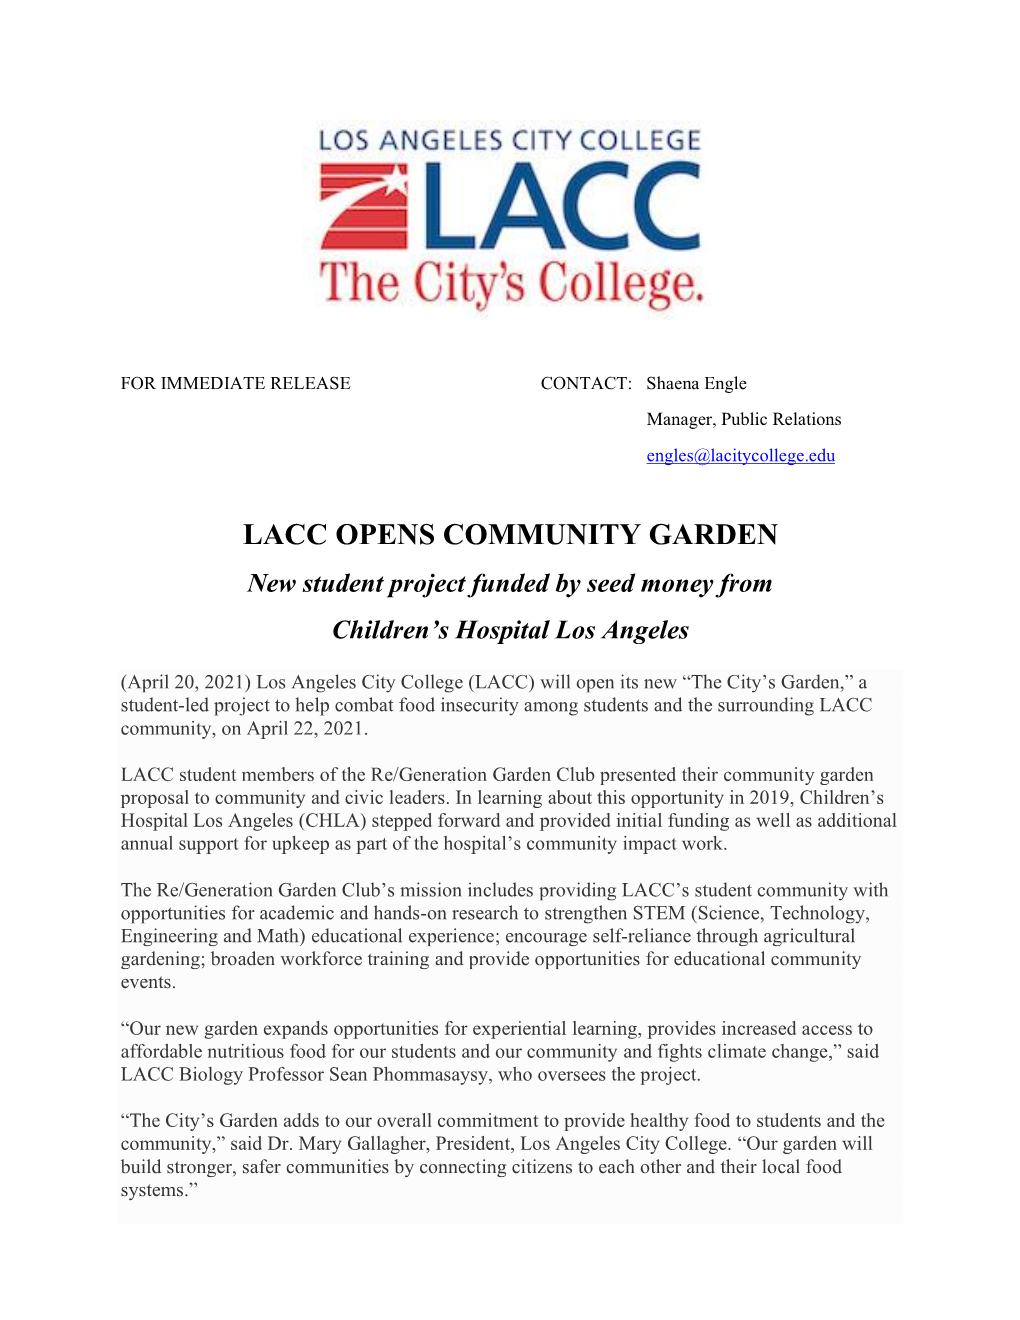 LACC OPENS COMMUNITY GARDEN New Student Project Funded by Seed Money from Children’S Hospital Los Angeles